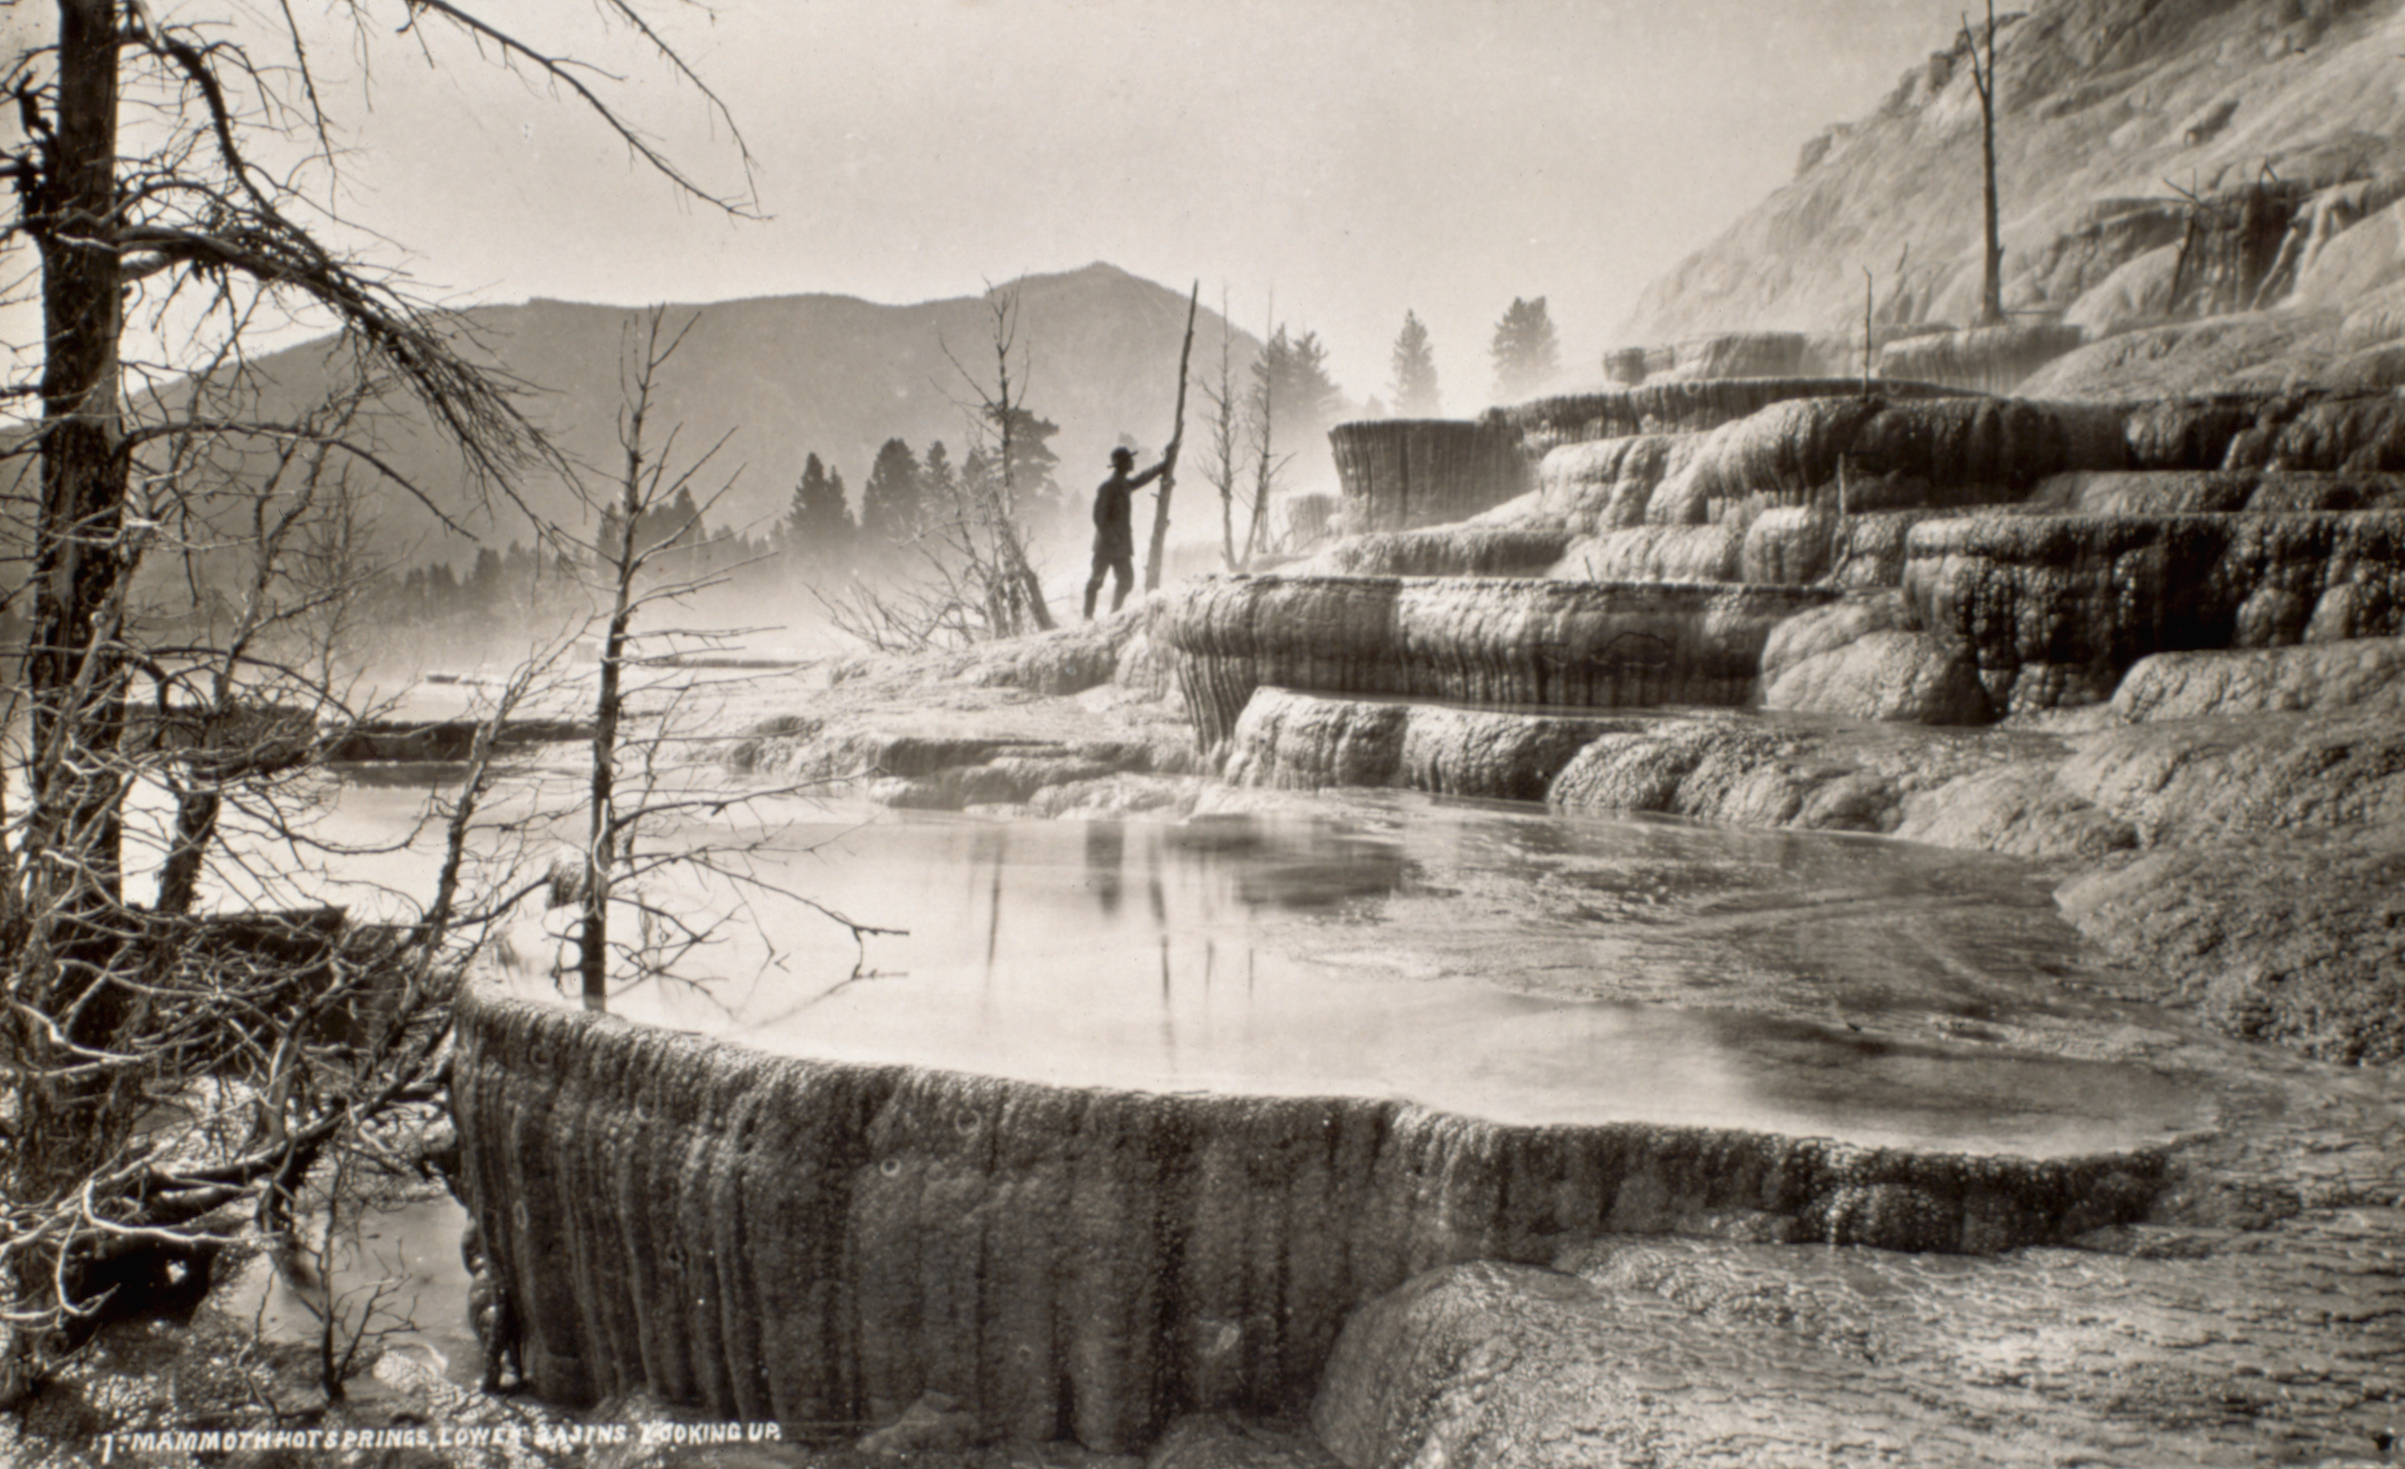 A man stands at the base of Mammoth Hot Springs in what is now Yellowstone National Park, Wyoming, ca. 1870. (Historical/Corbis/Getty Images)